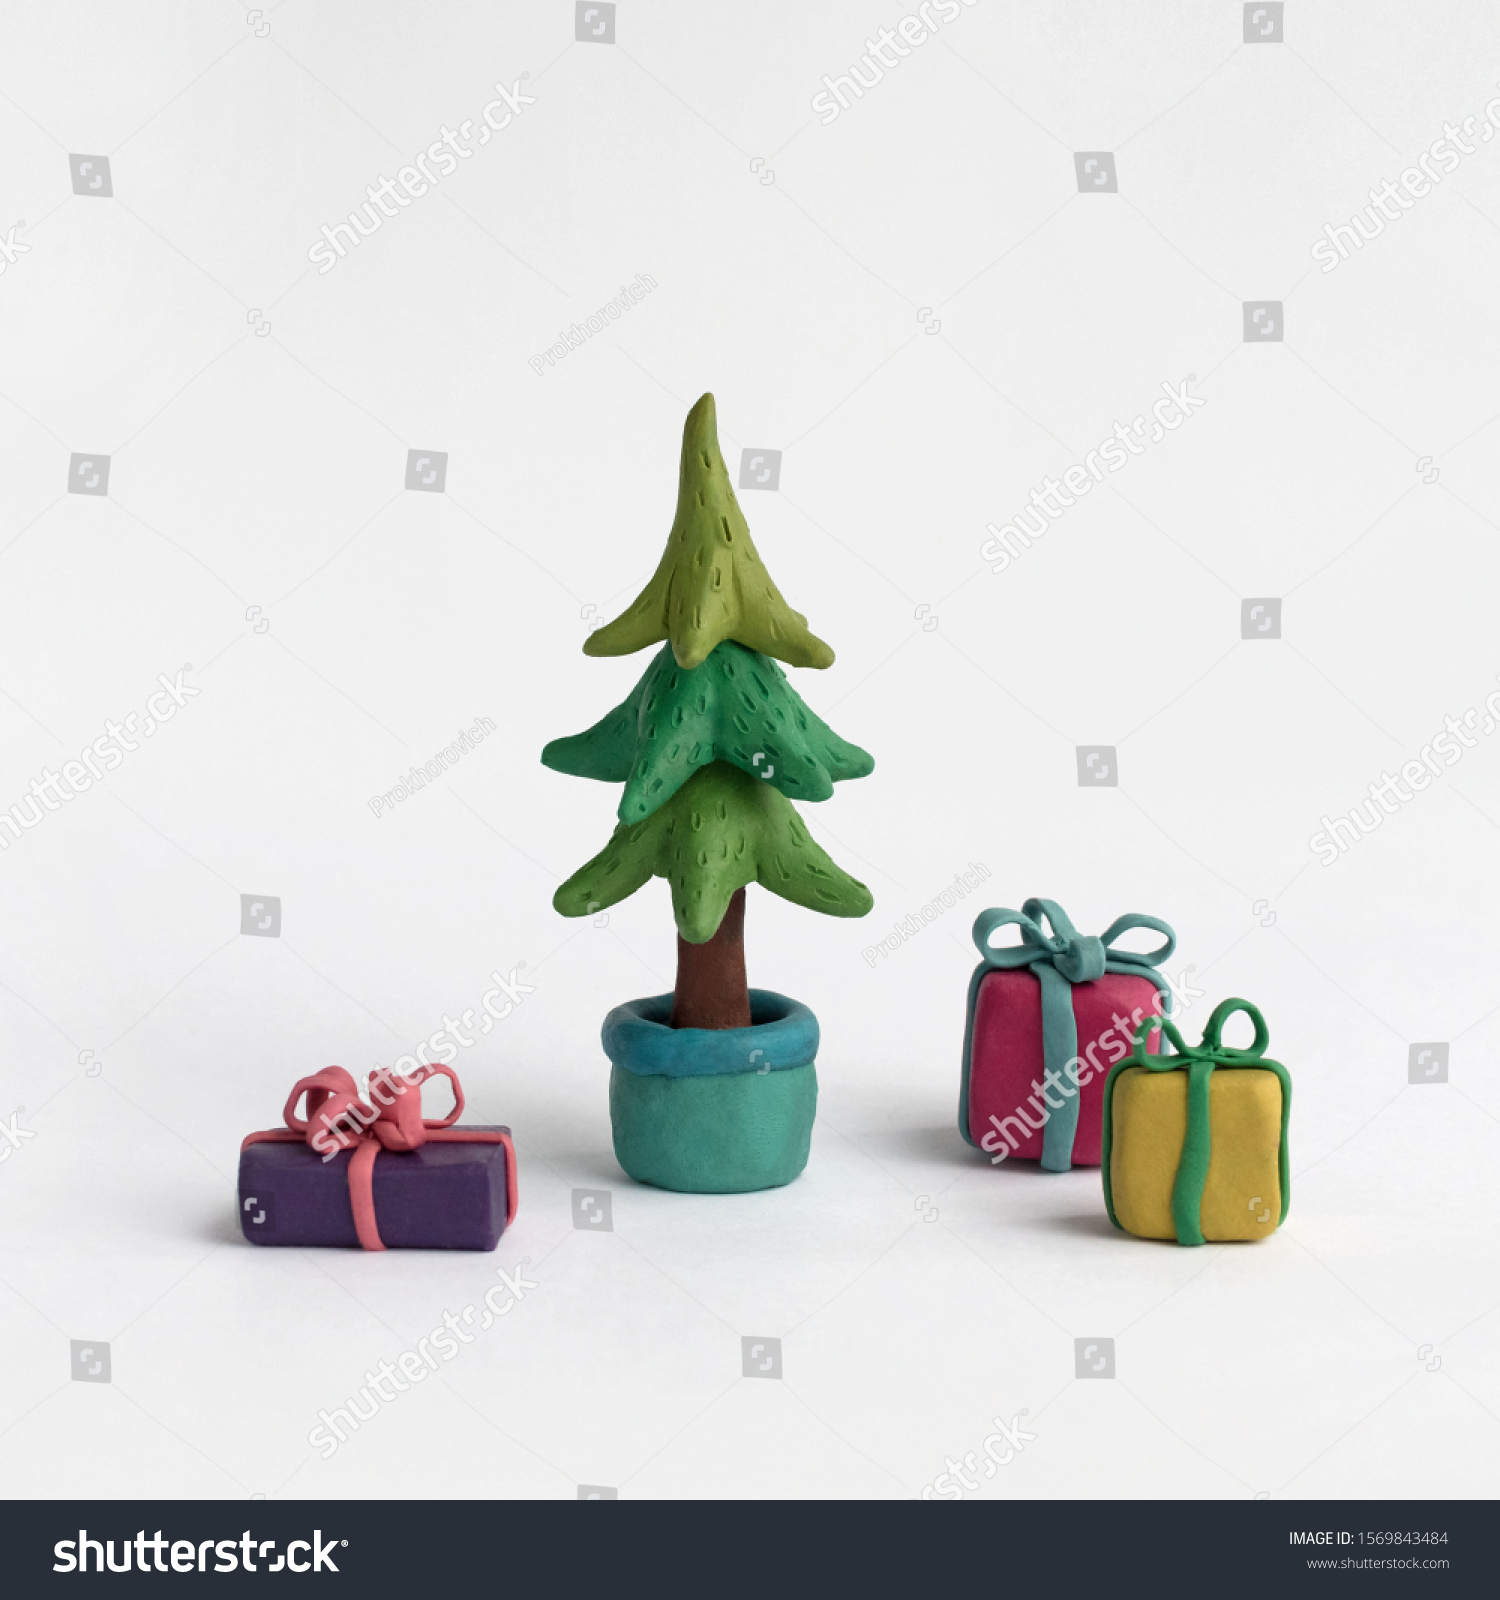 Christmas tree and gifts on a white background. Plasticine illustration #1569843484